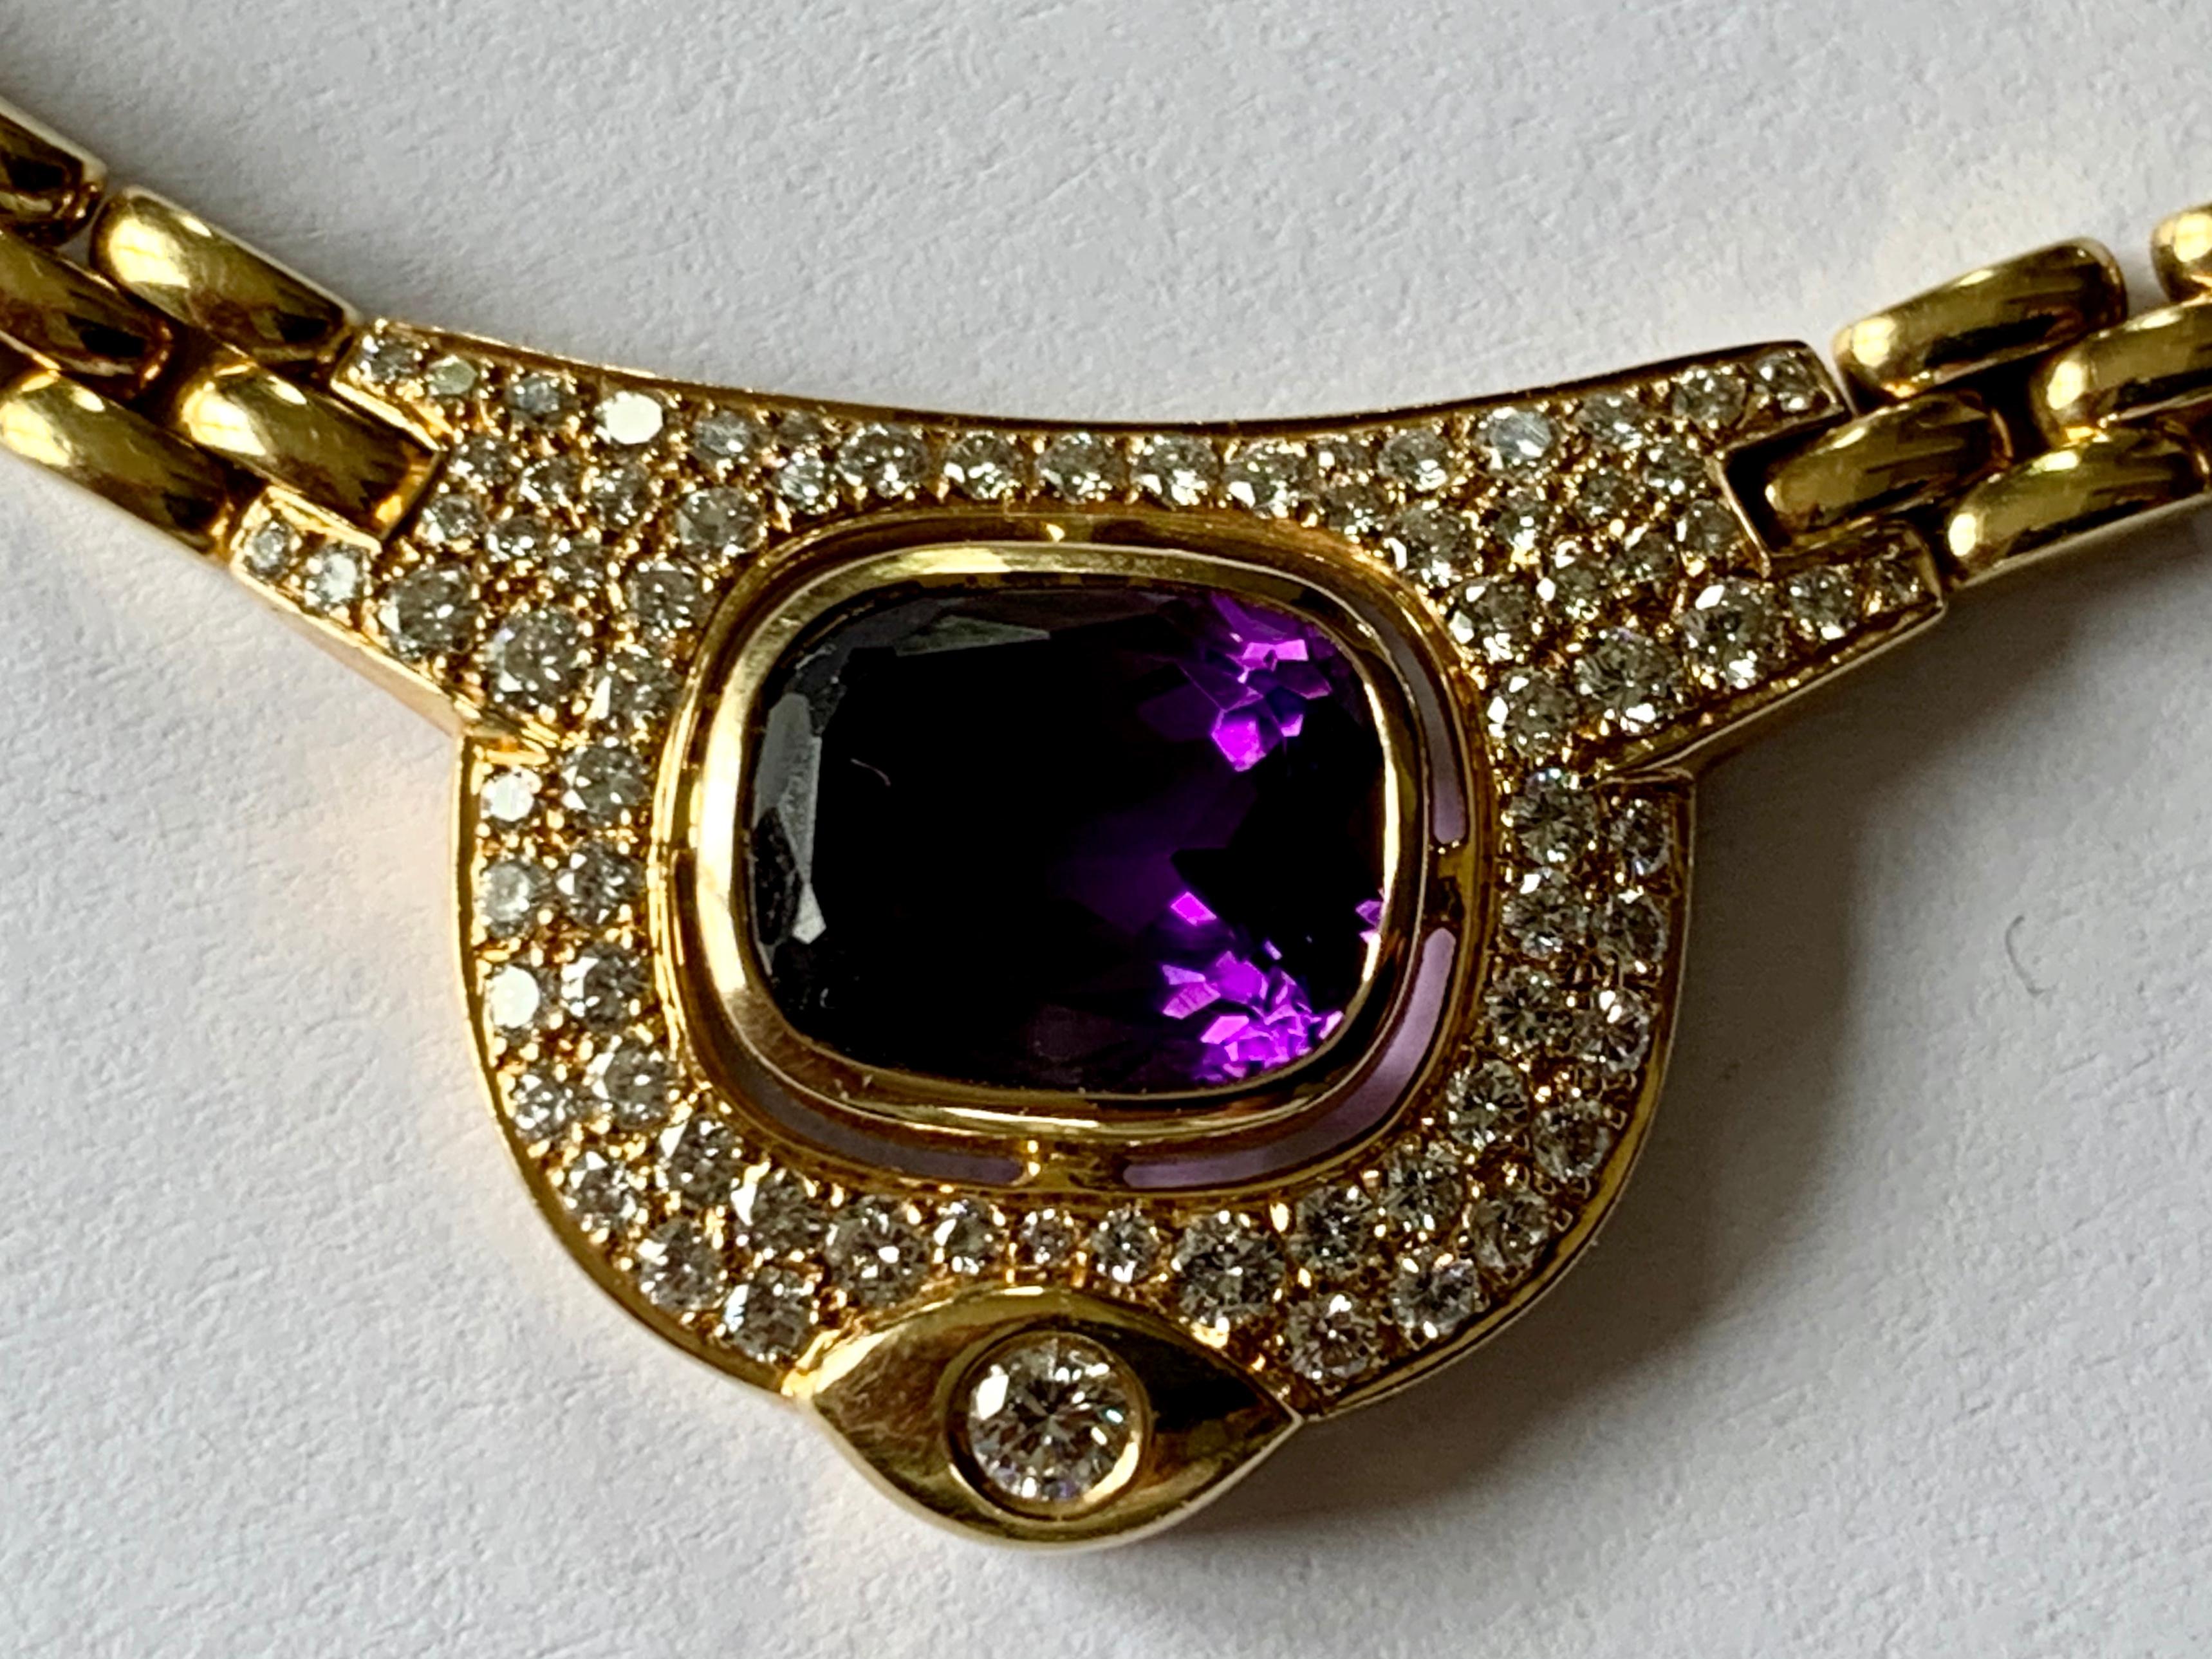 Vintage 18 K Gold Link Chain Necklace with Amethyst and Diamonds by Kurz Zurich 4